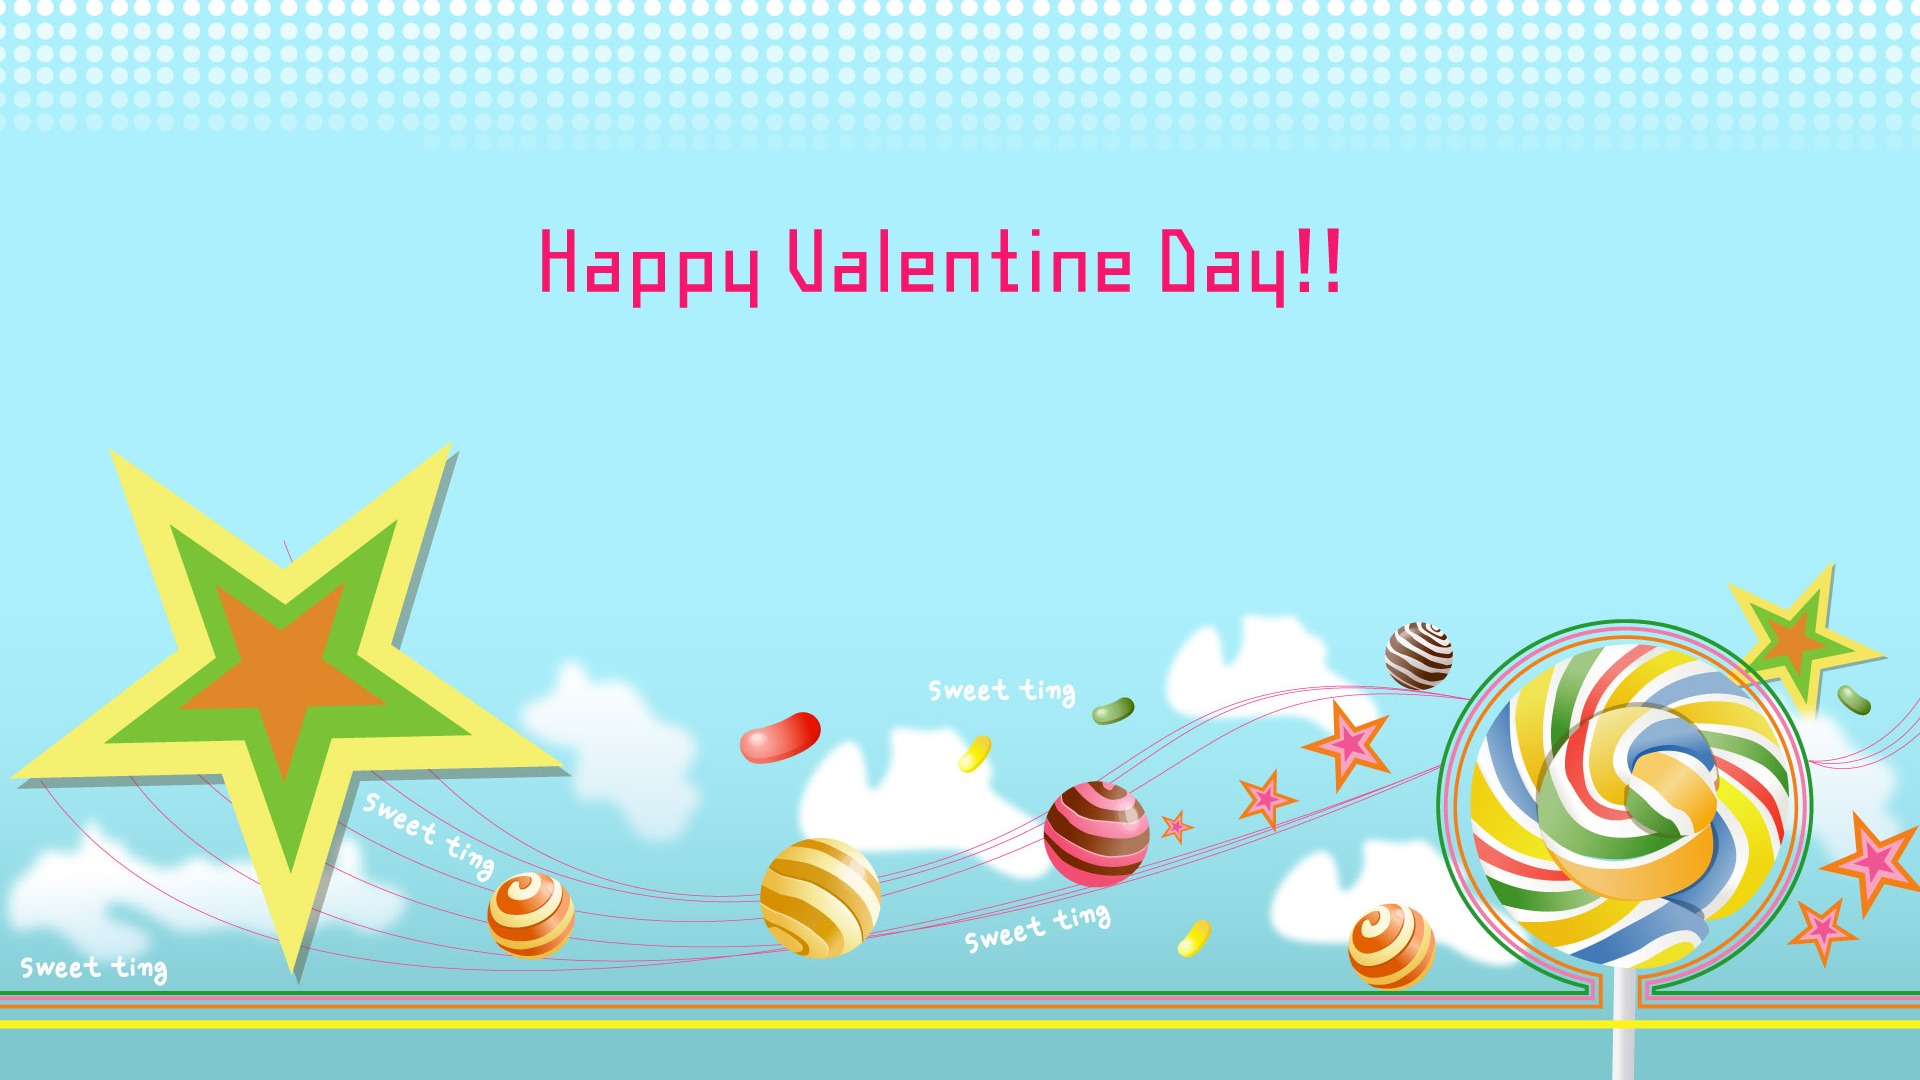 Valentine's Day Love Theme Wallpapers (3) #8 - 1920x1080